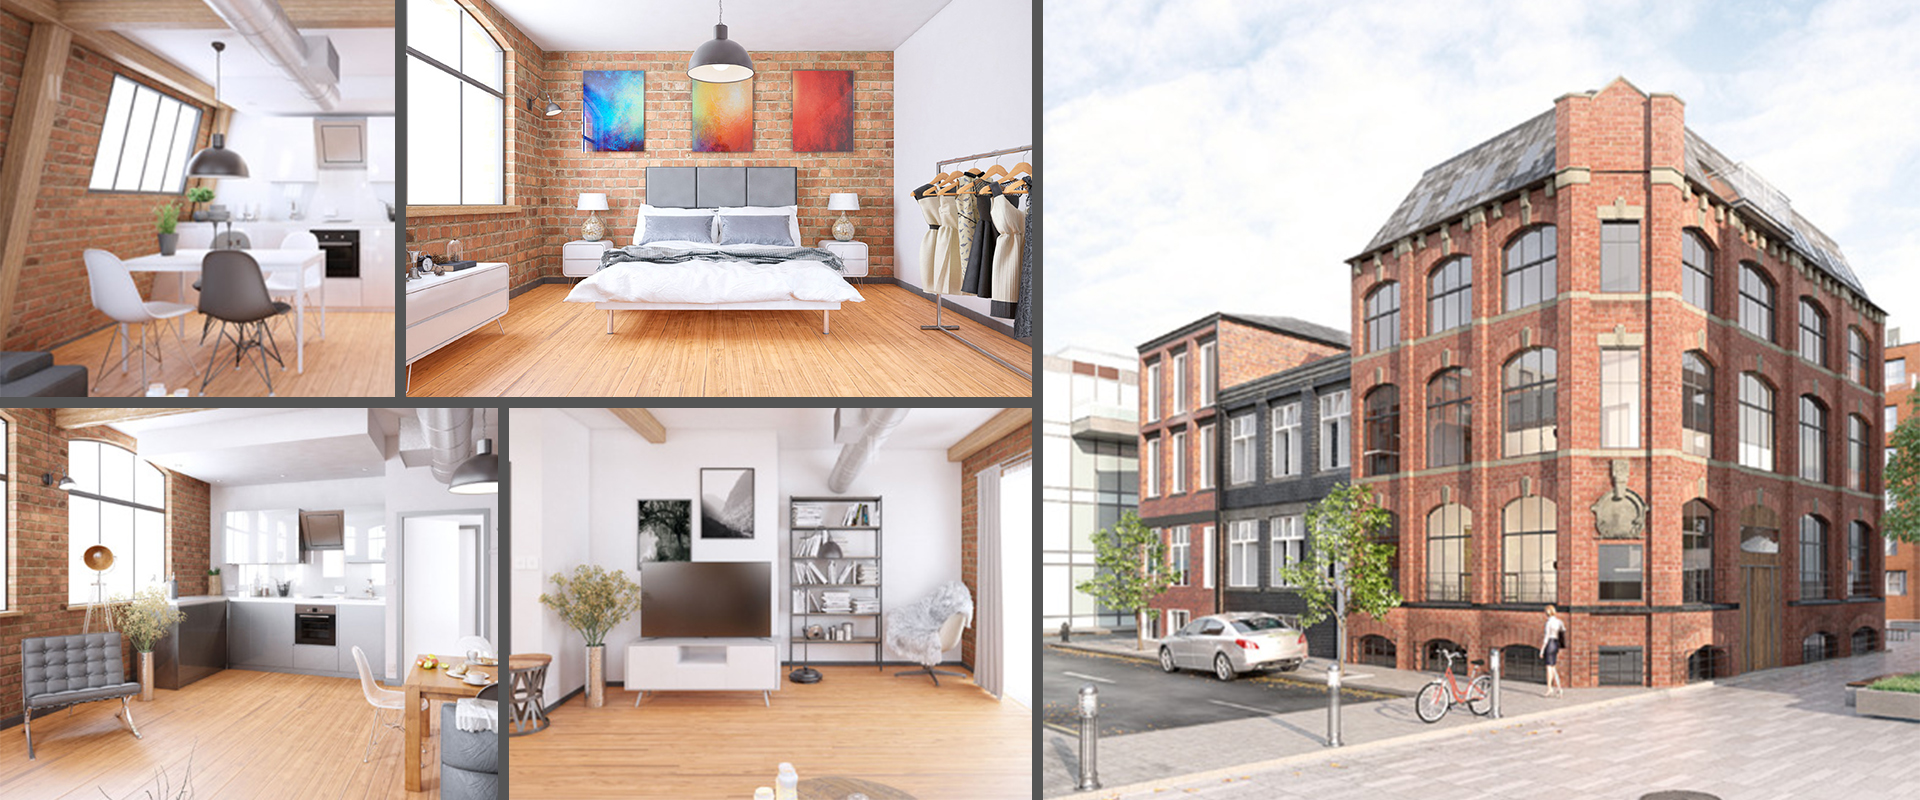 Manchester - Guide Price from: £158,340 - 6% rental income (SOLD OUT))